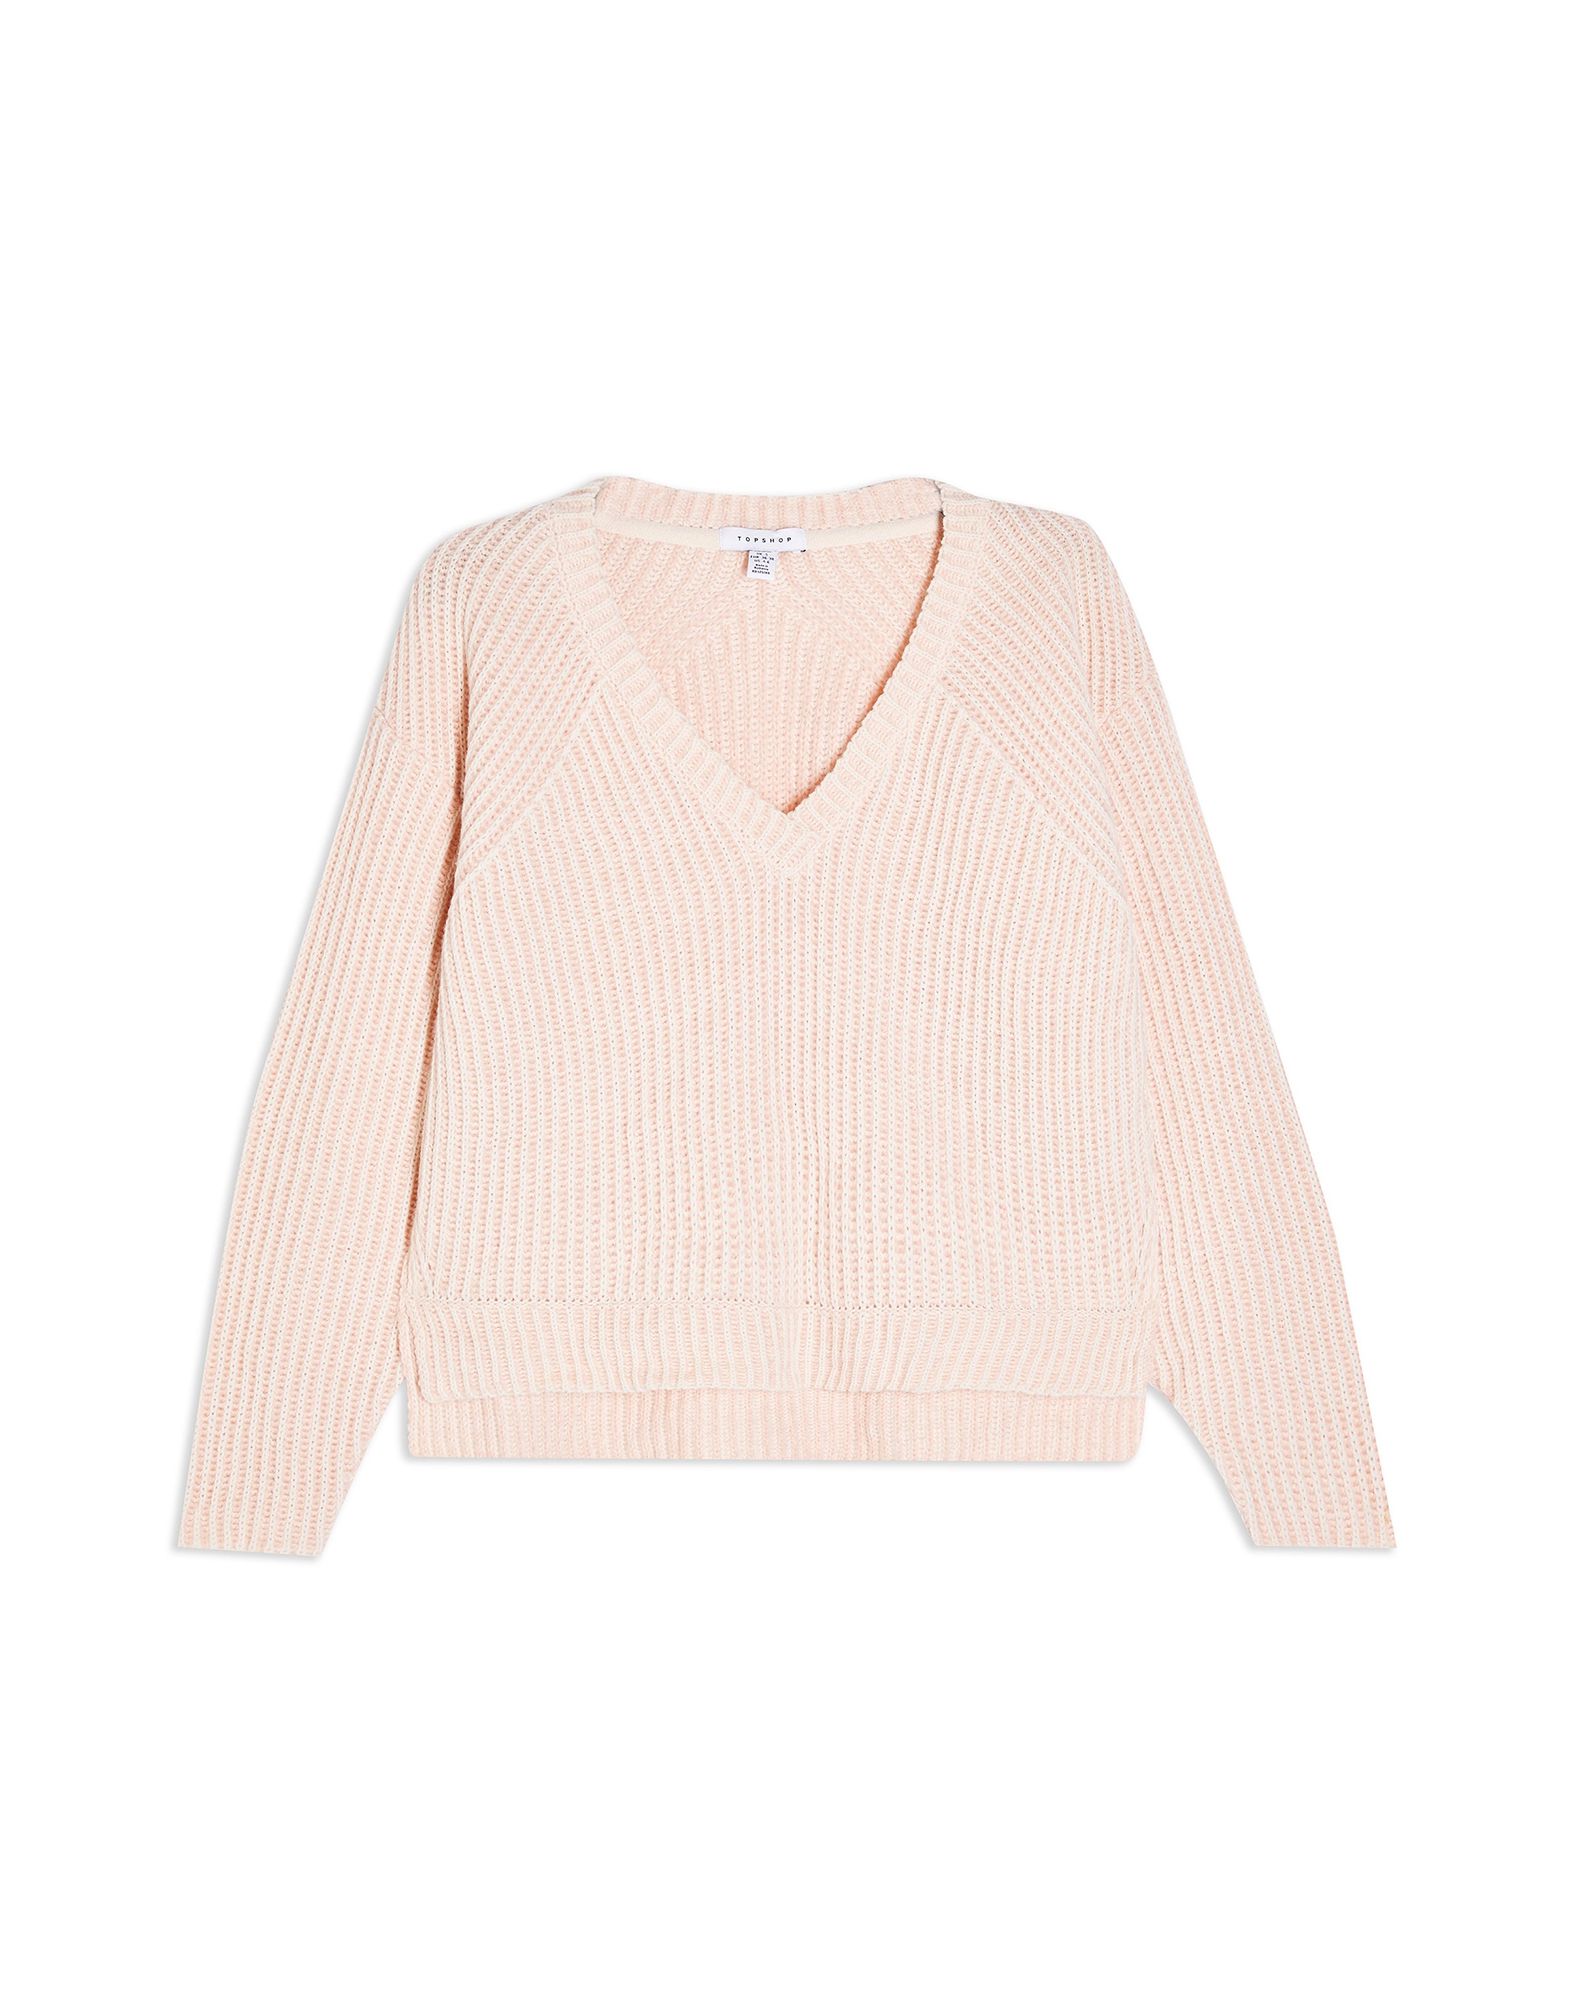 ＜YOOX＞ ★55%OFF！TOPSHOP レディース プルオーバー ライトピンク L アクリル 93% / ナイロン 7% PINK V NECK PLAITED KNITTED JUMPER画像